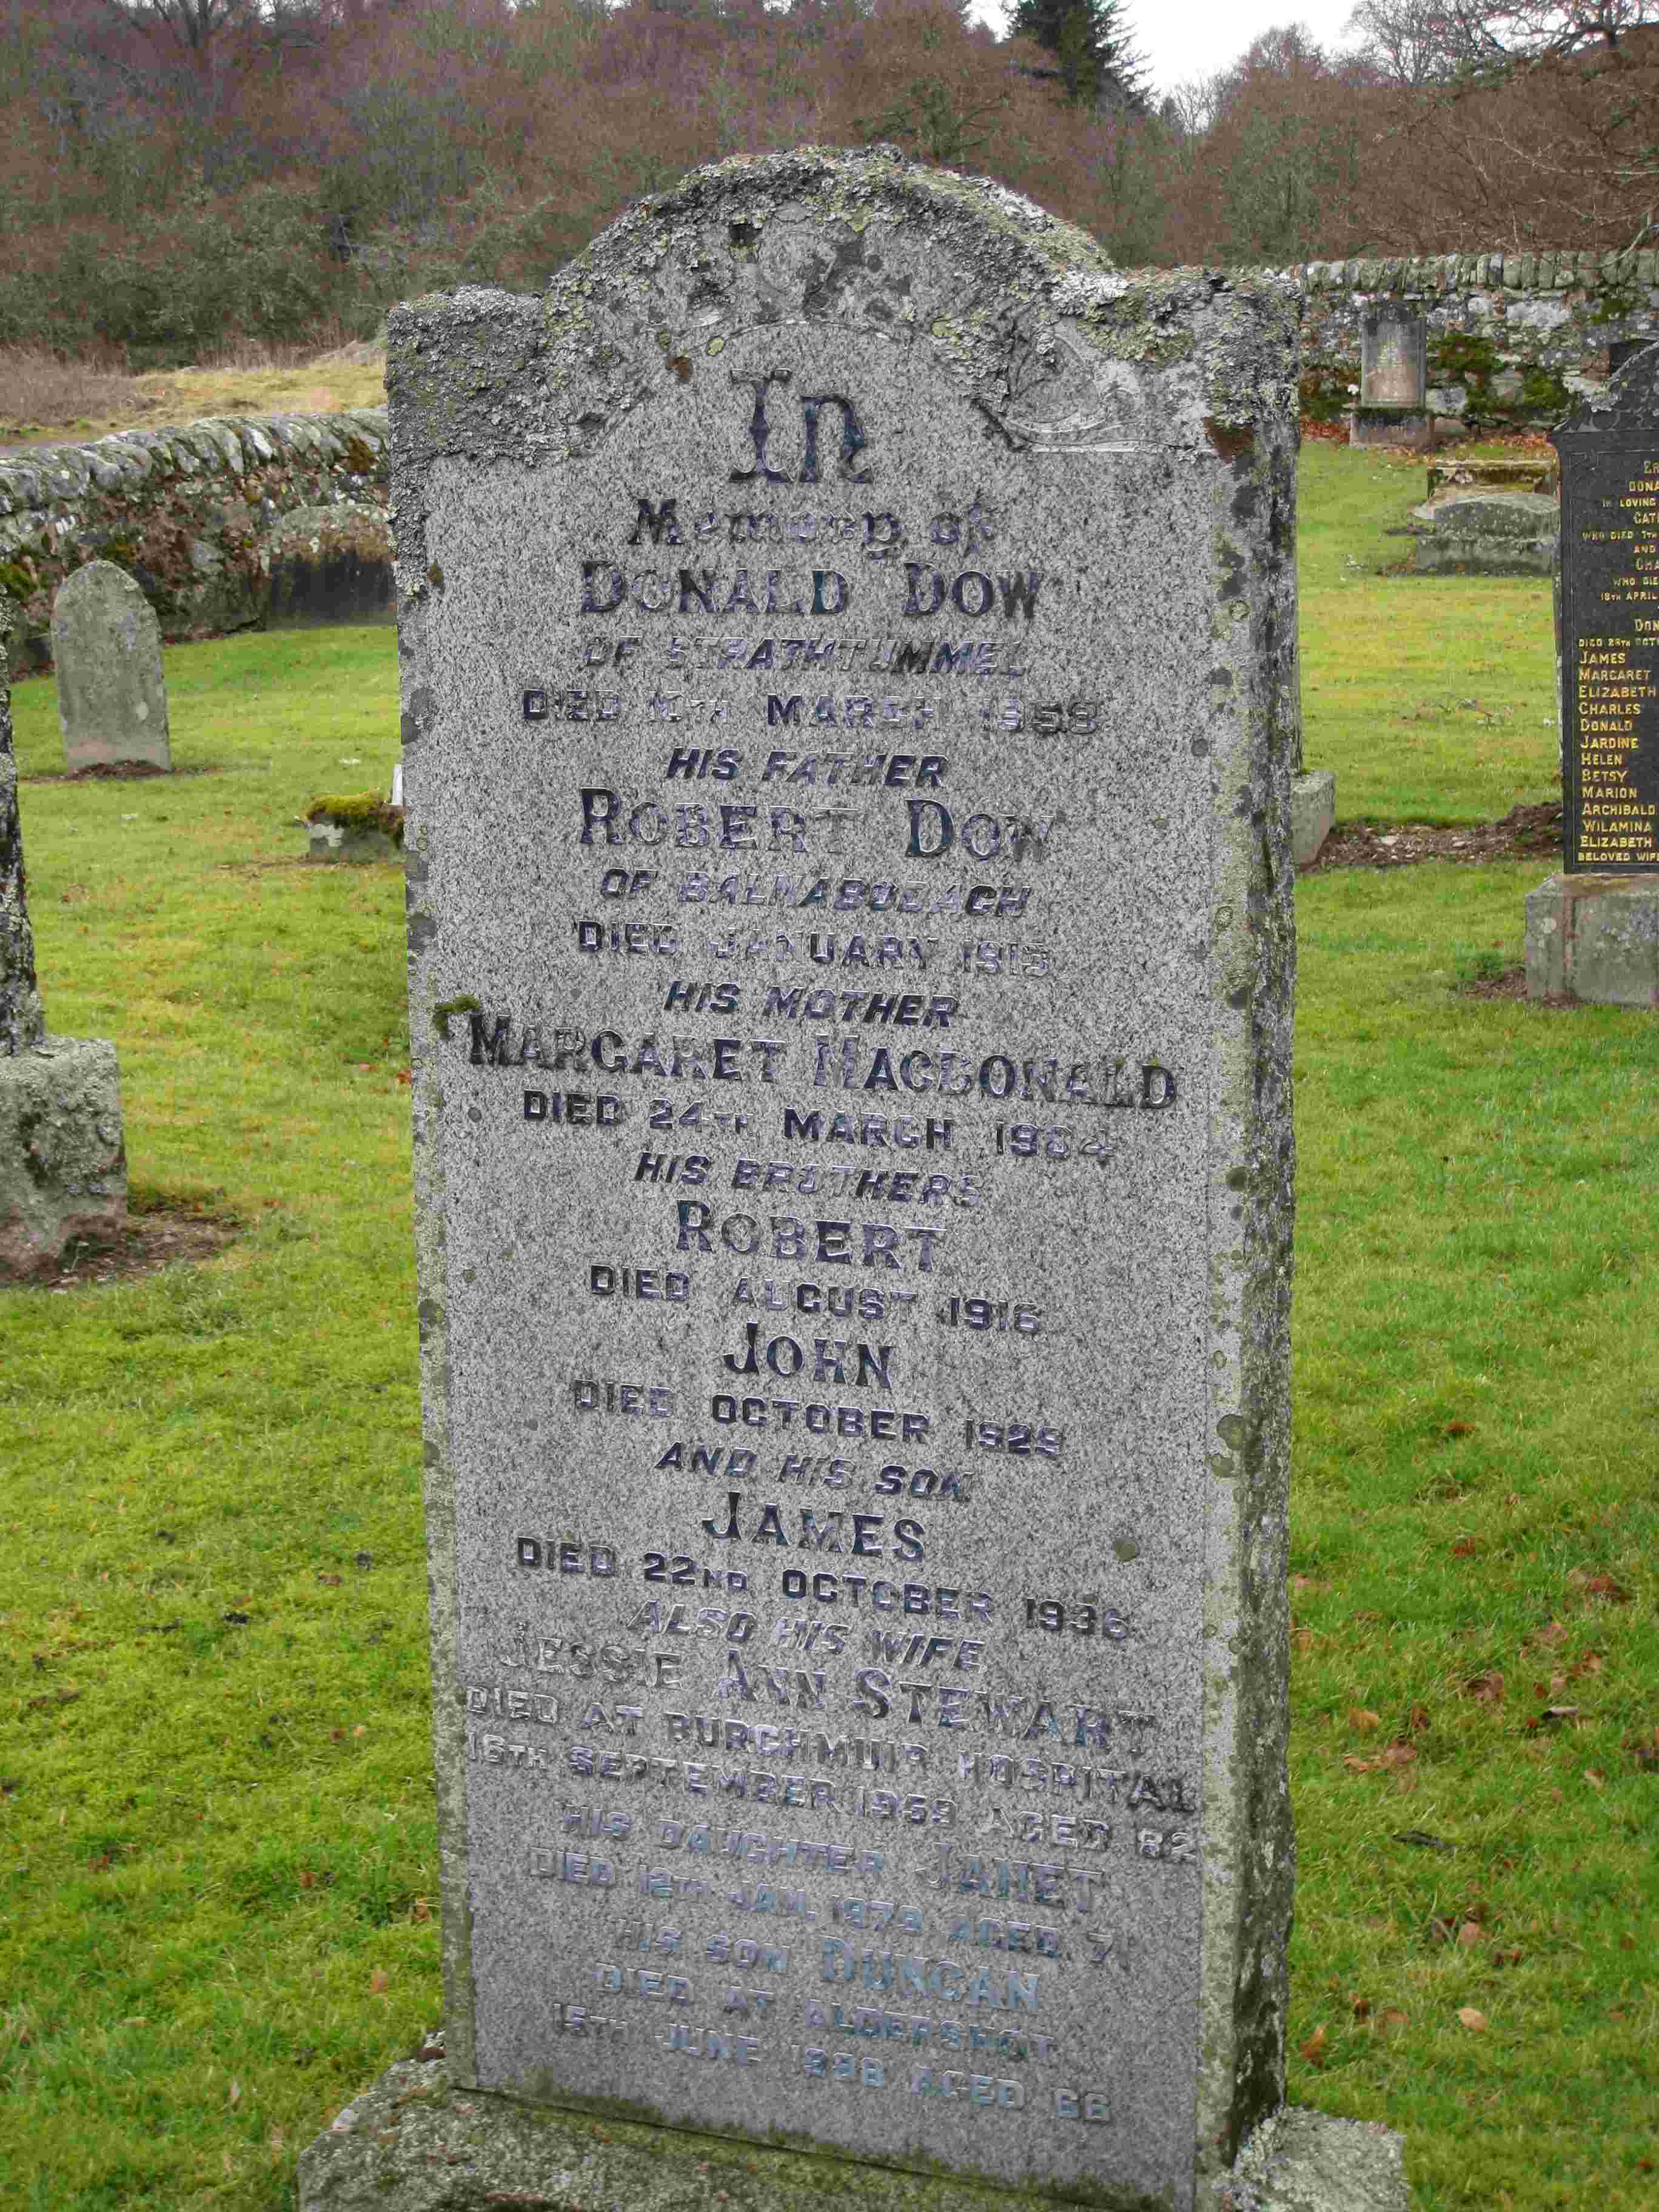 Monument to Donald Dow of Tomintianda